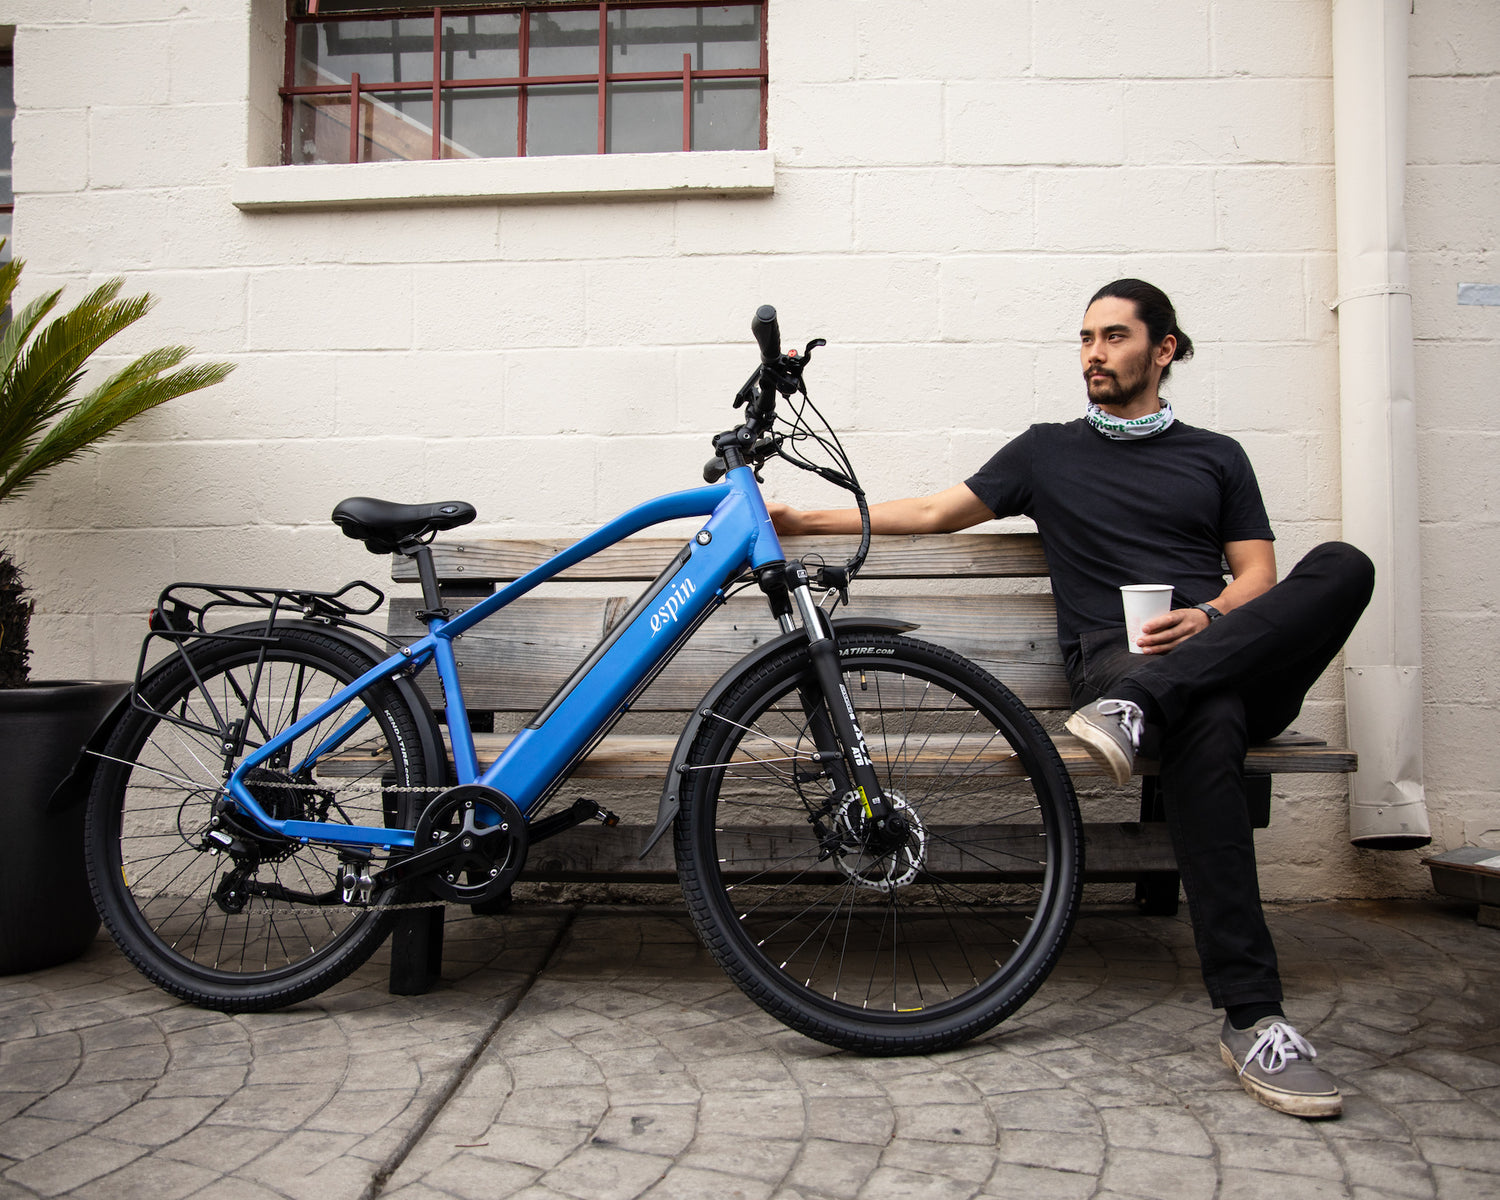 4 Business Models that Can Benefit from the Use of Electric Bikes Today